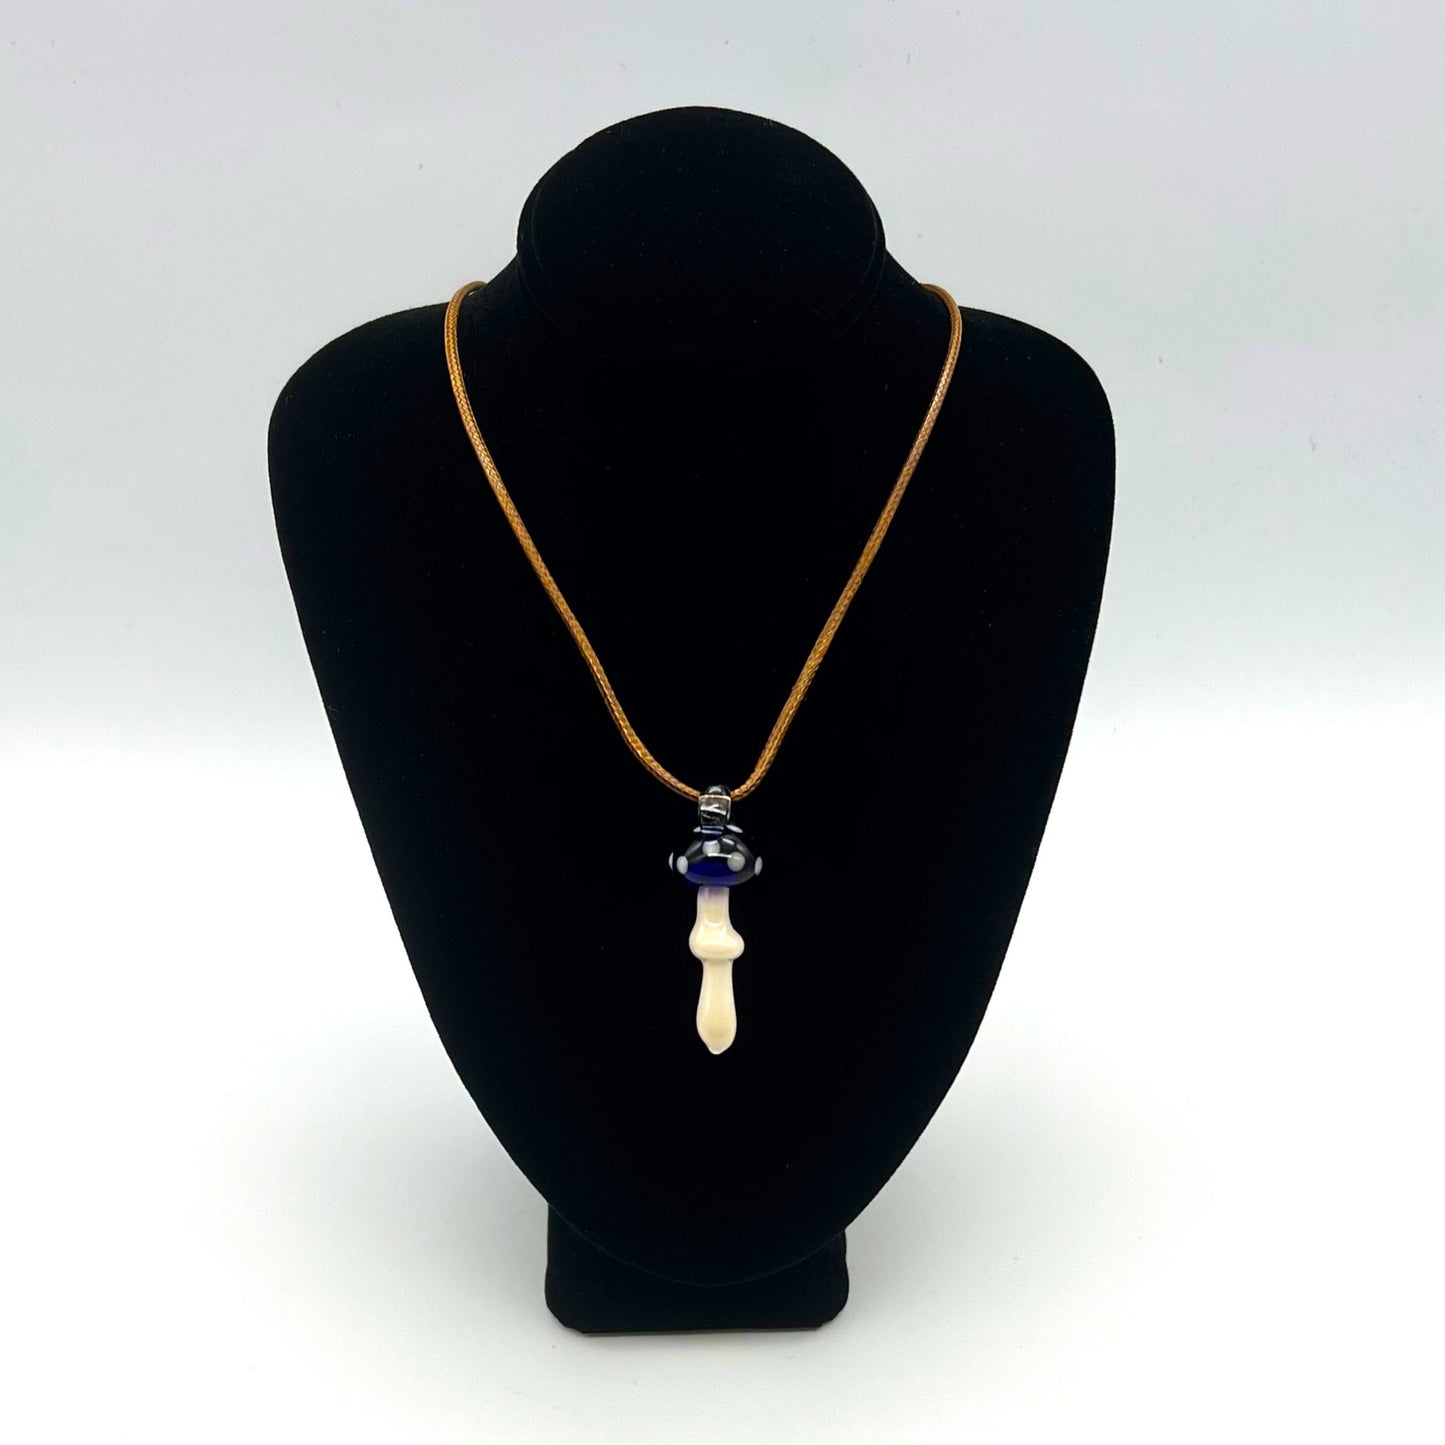 Whimsical Mushroom Pendant Necklaces by AB Glass Designs